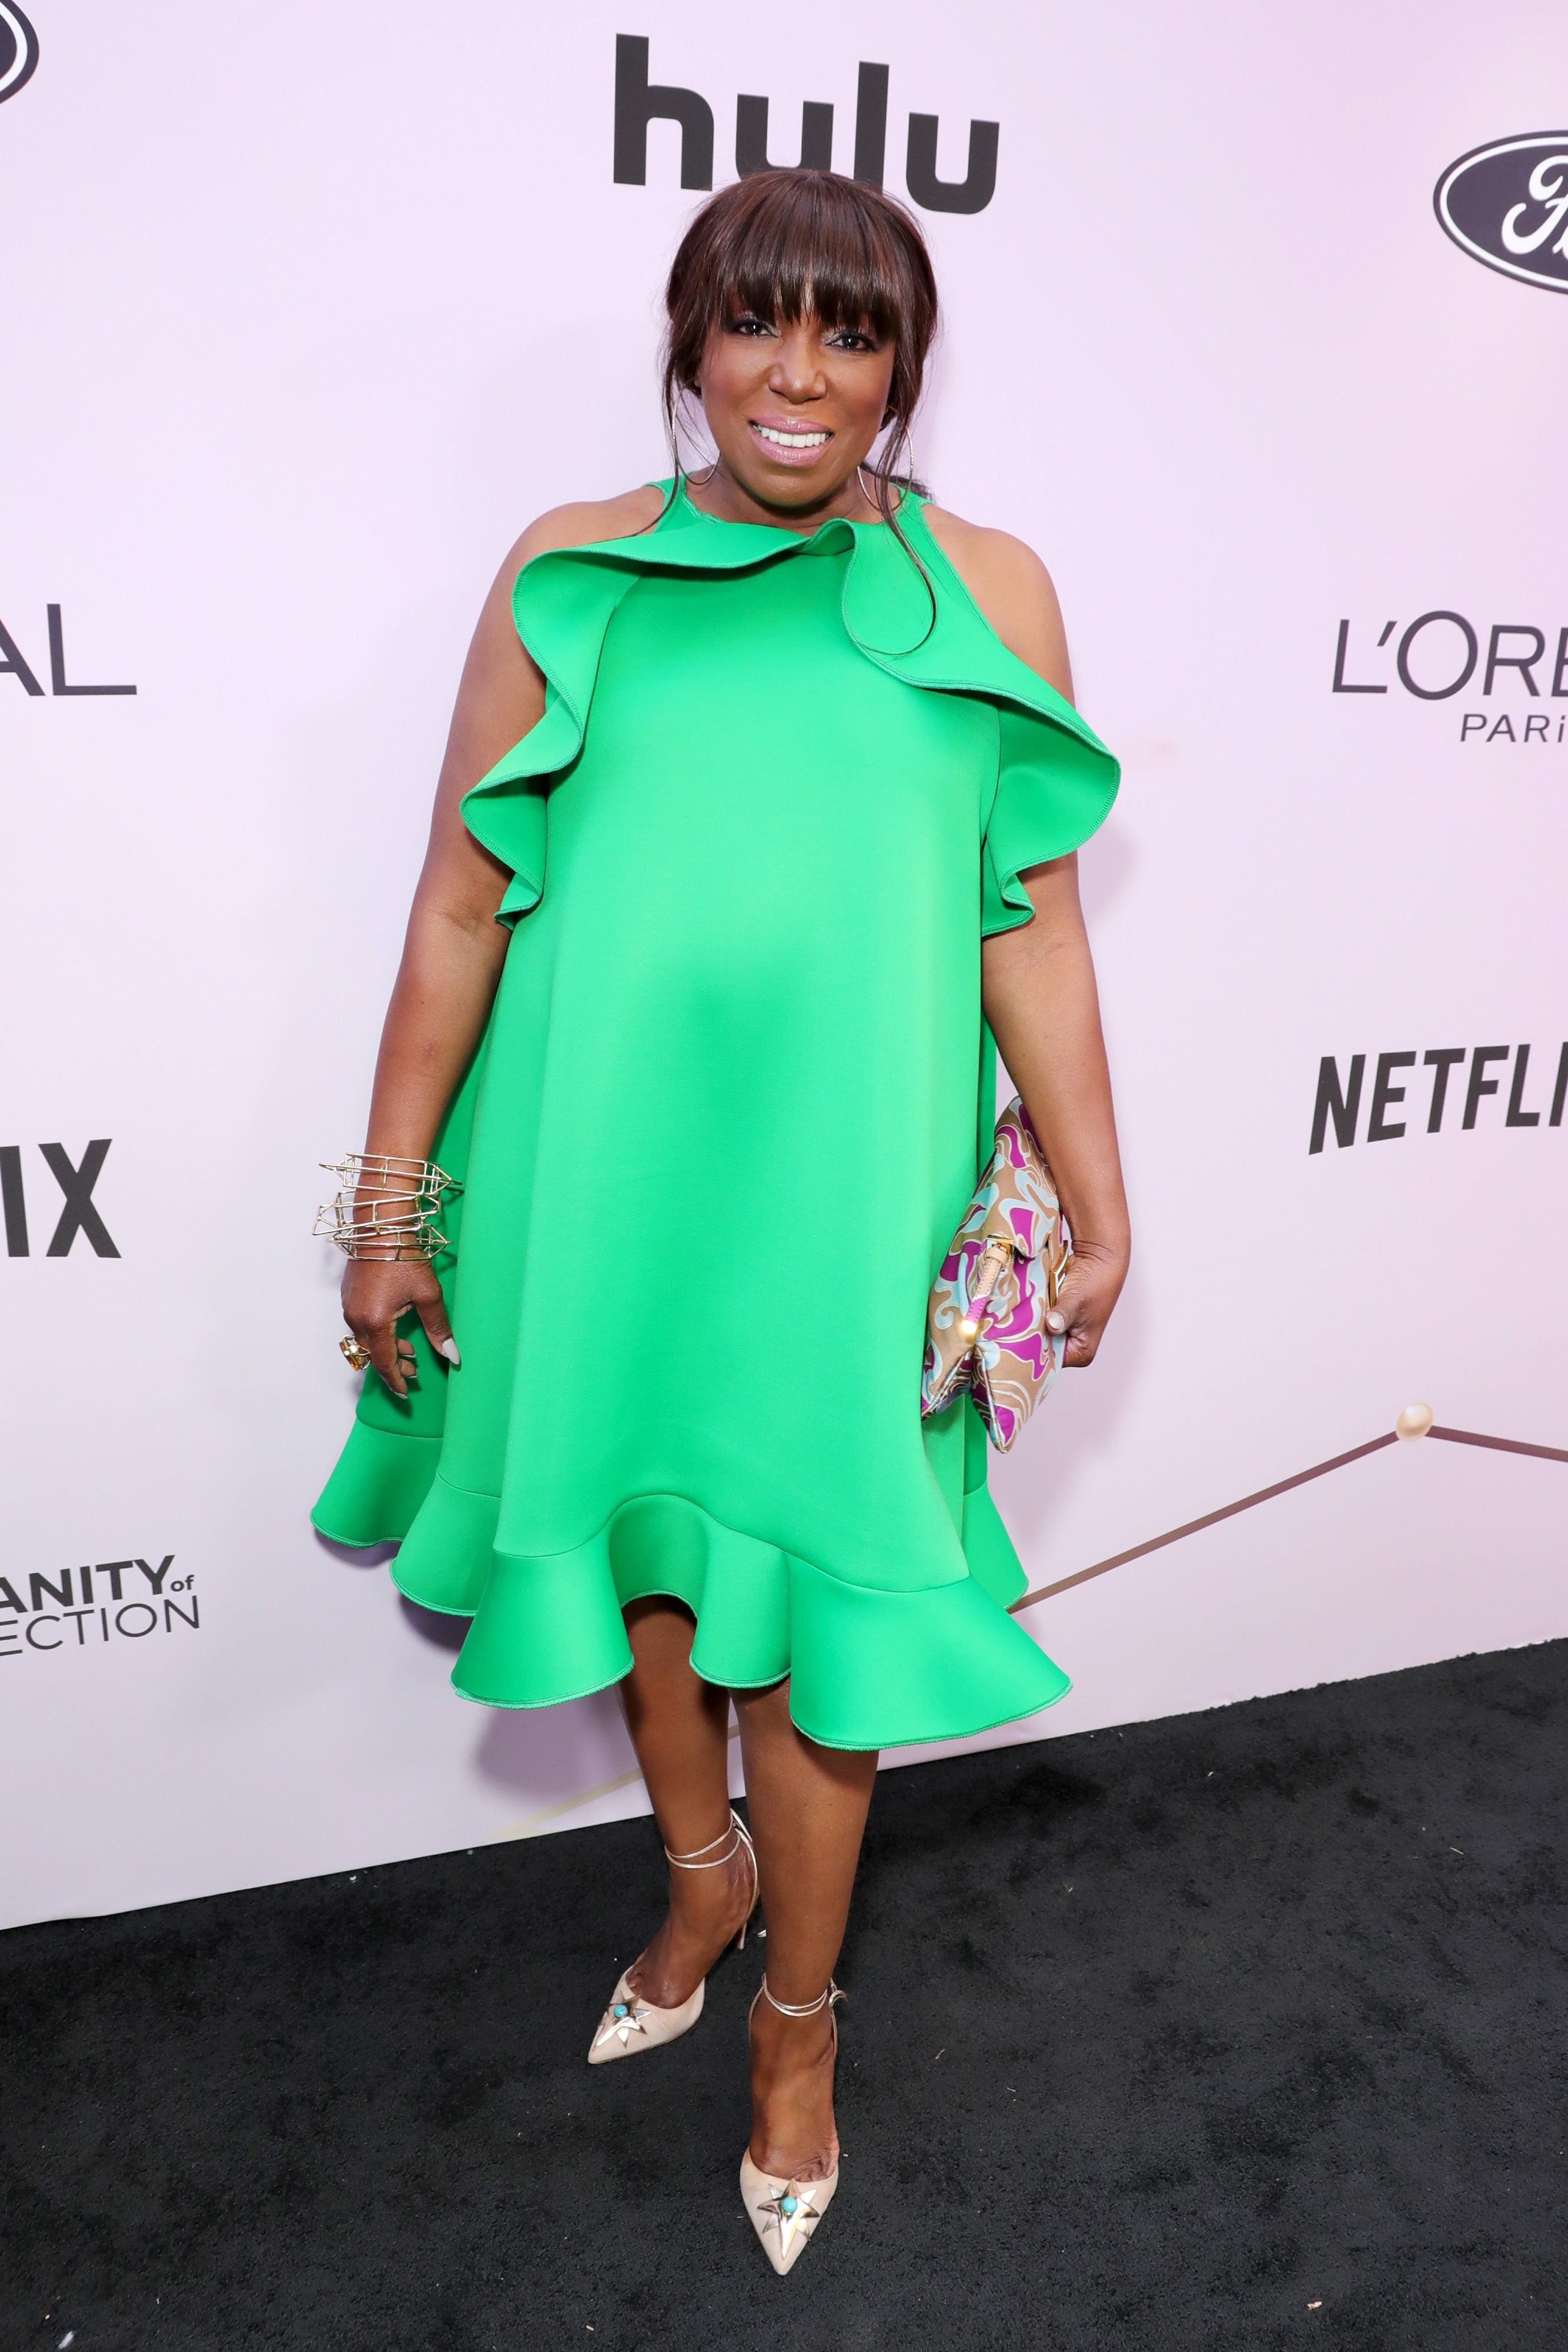 All The Head-Turning Fashion Looks From Last Year's ESSENCE Black Women In Hollywood Awards